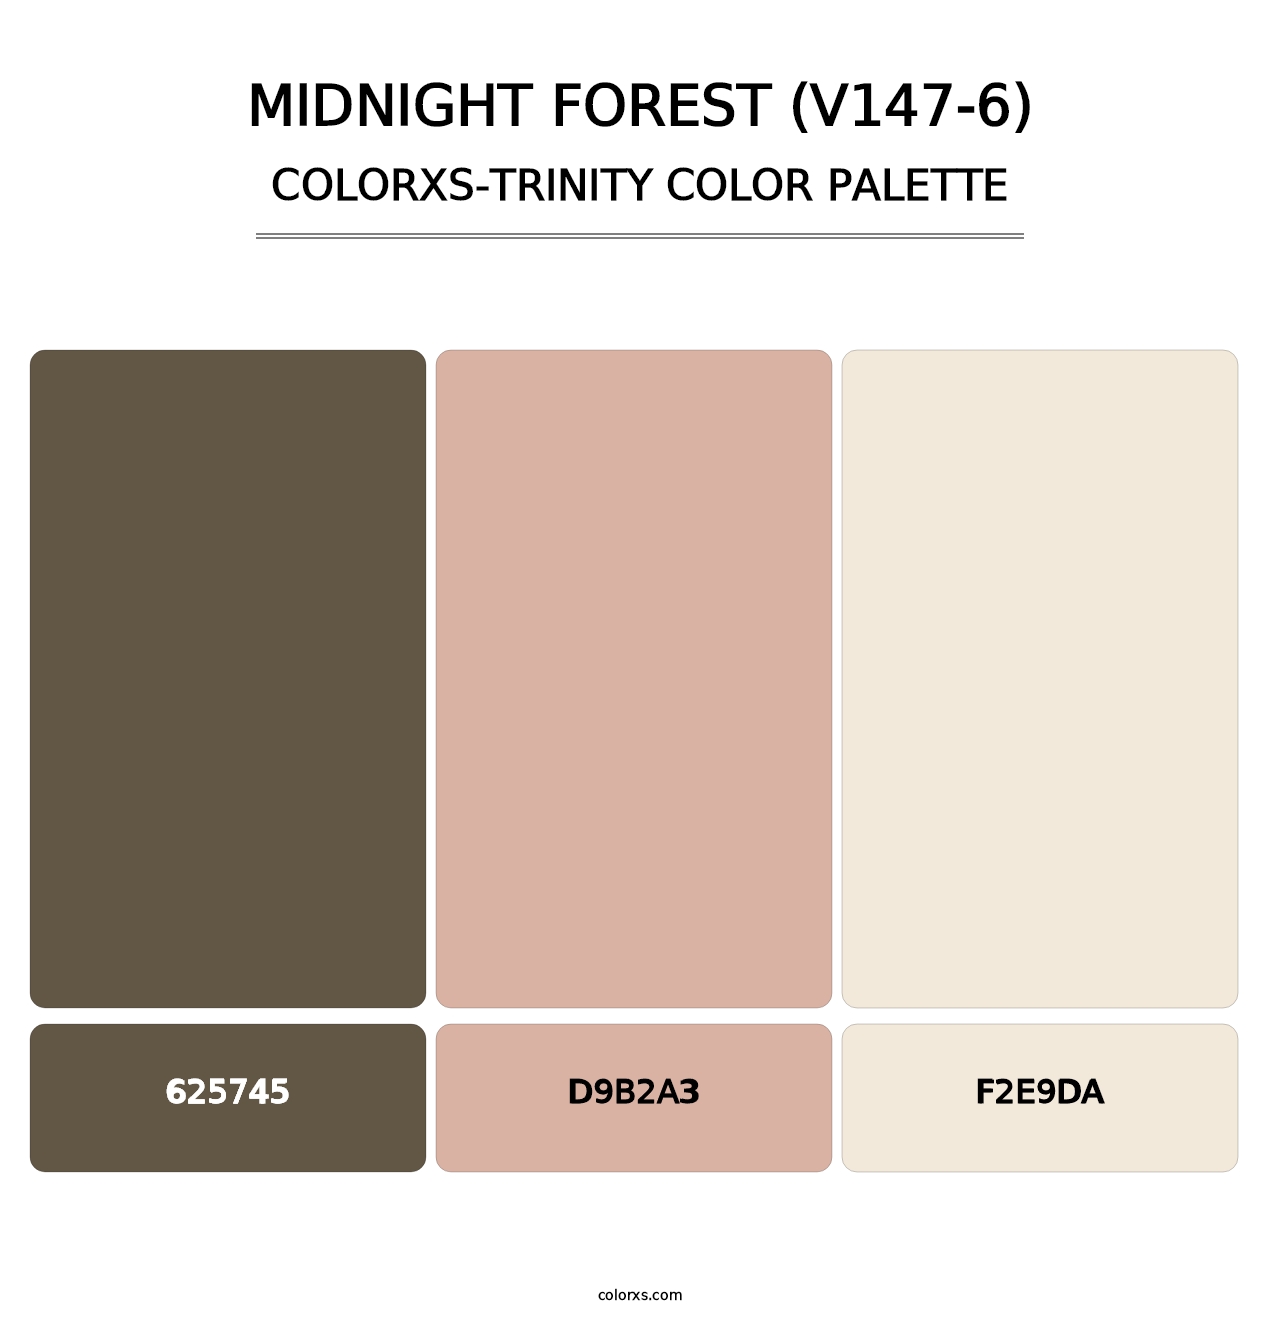 Midnight Forest (V147-6) - Colorxs Trinity Palette